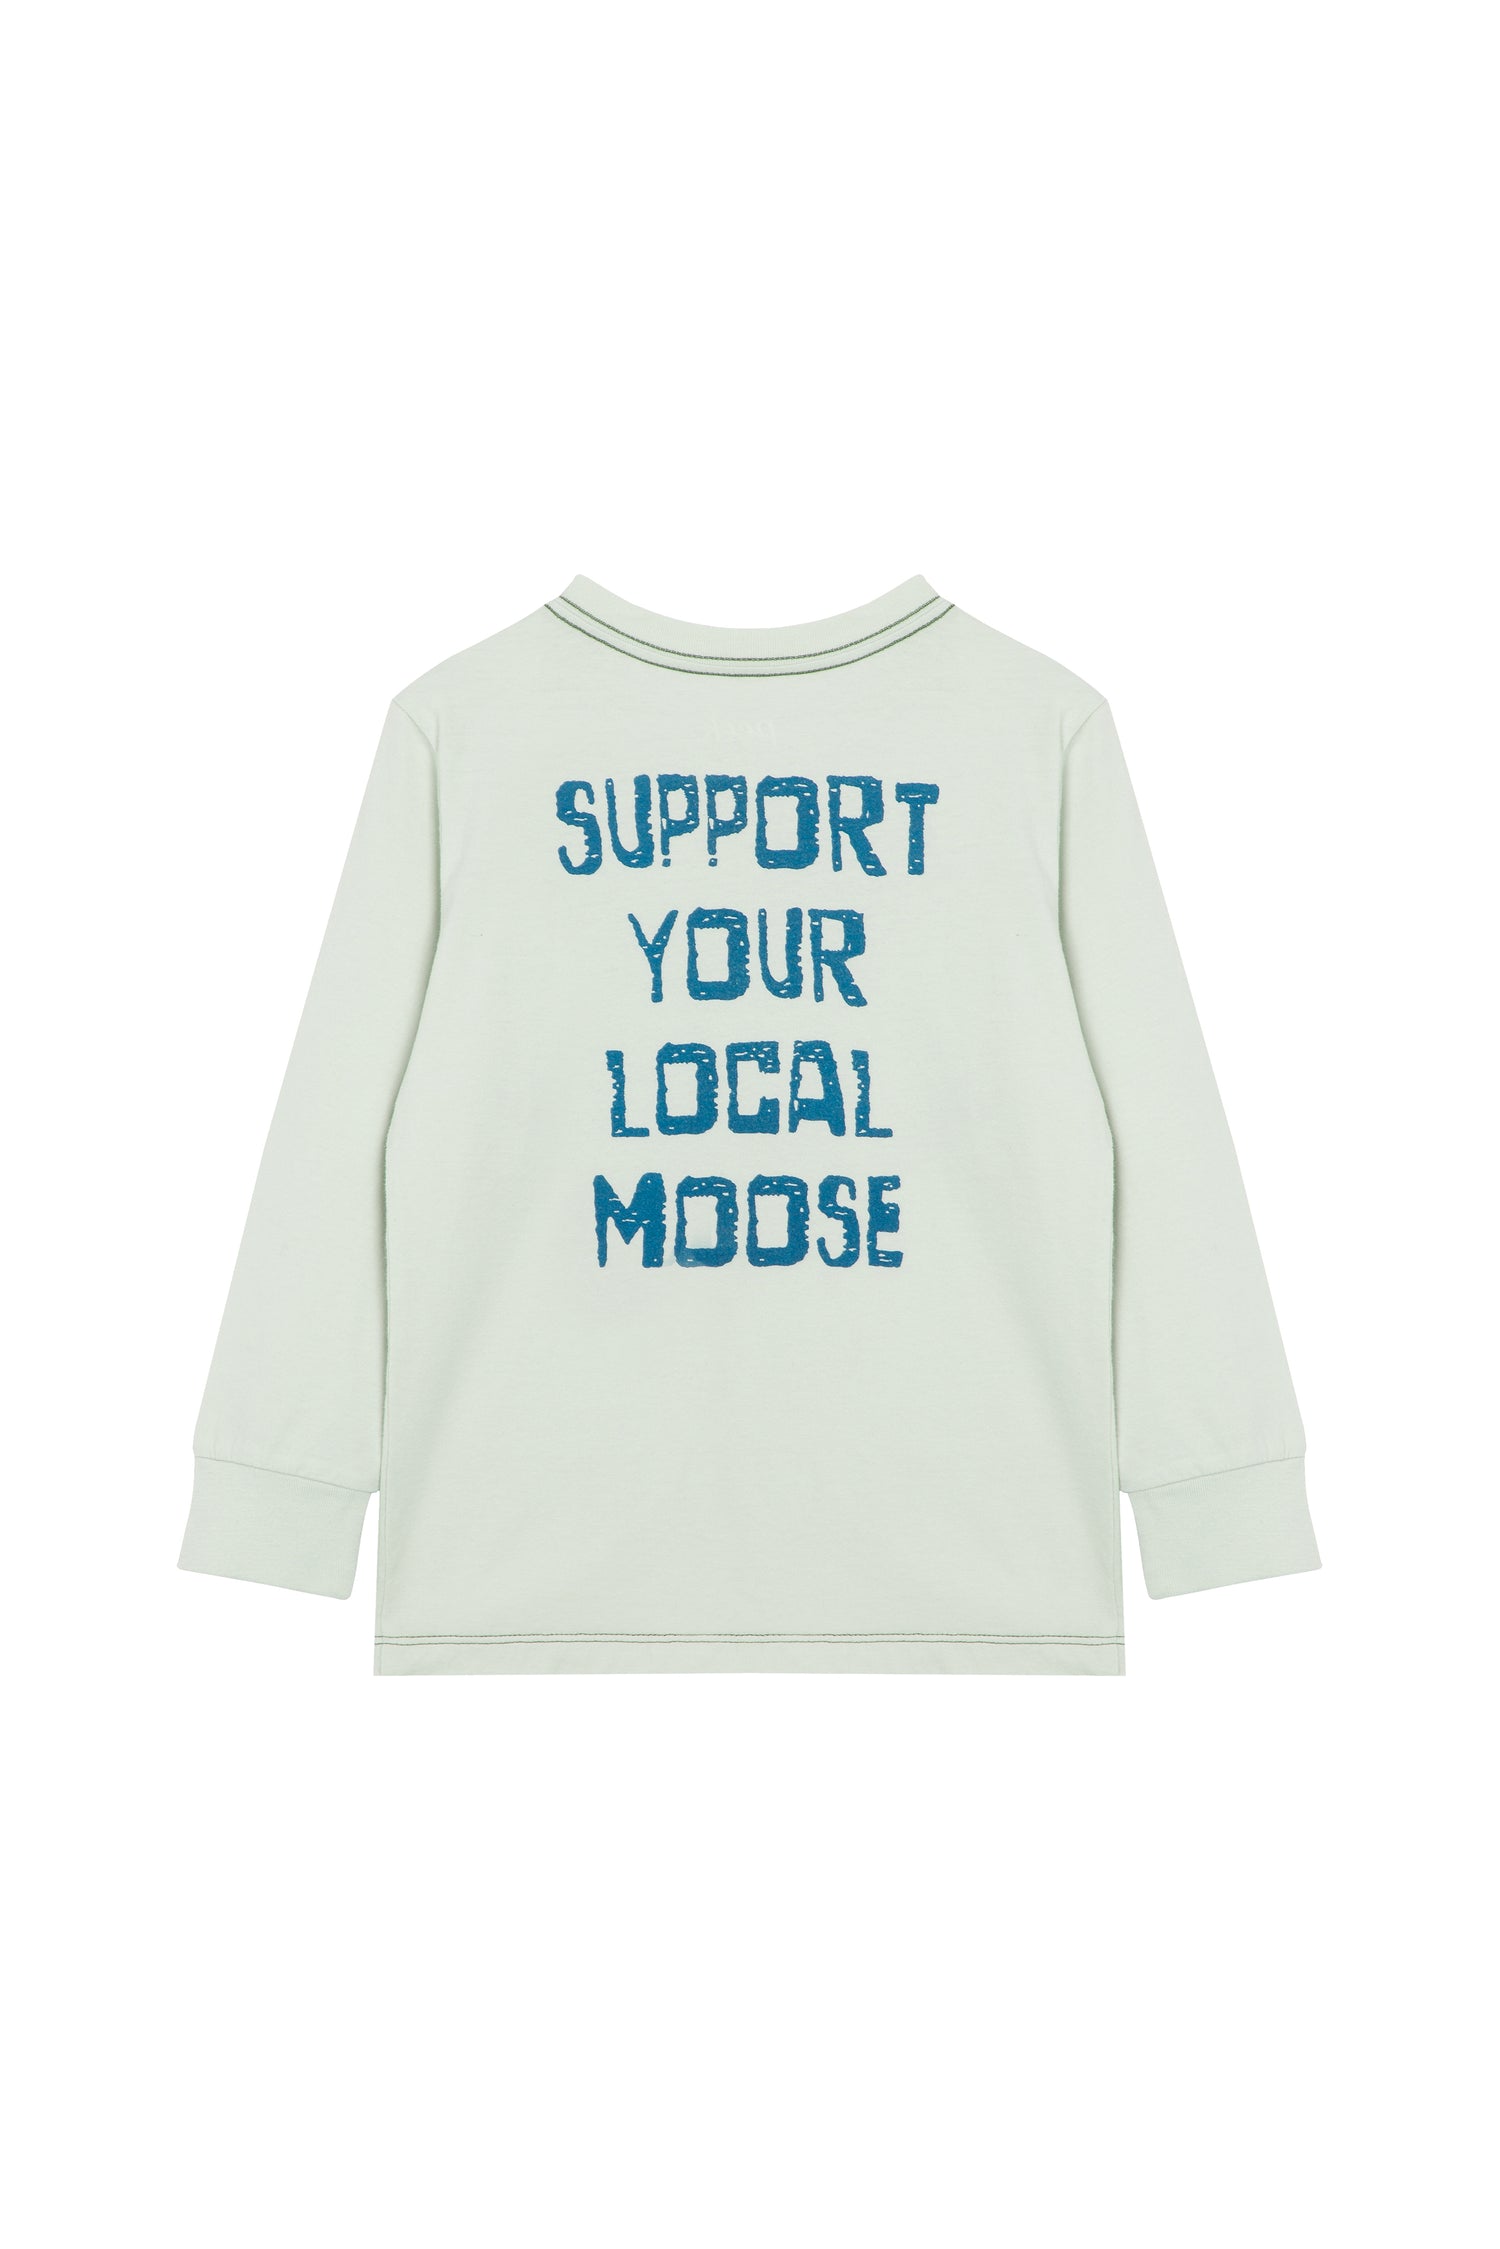 Back of light green sweatshirt with blue "support your local moose" text